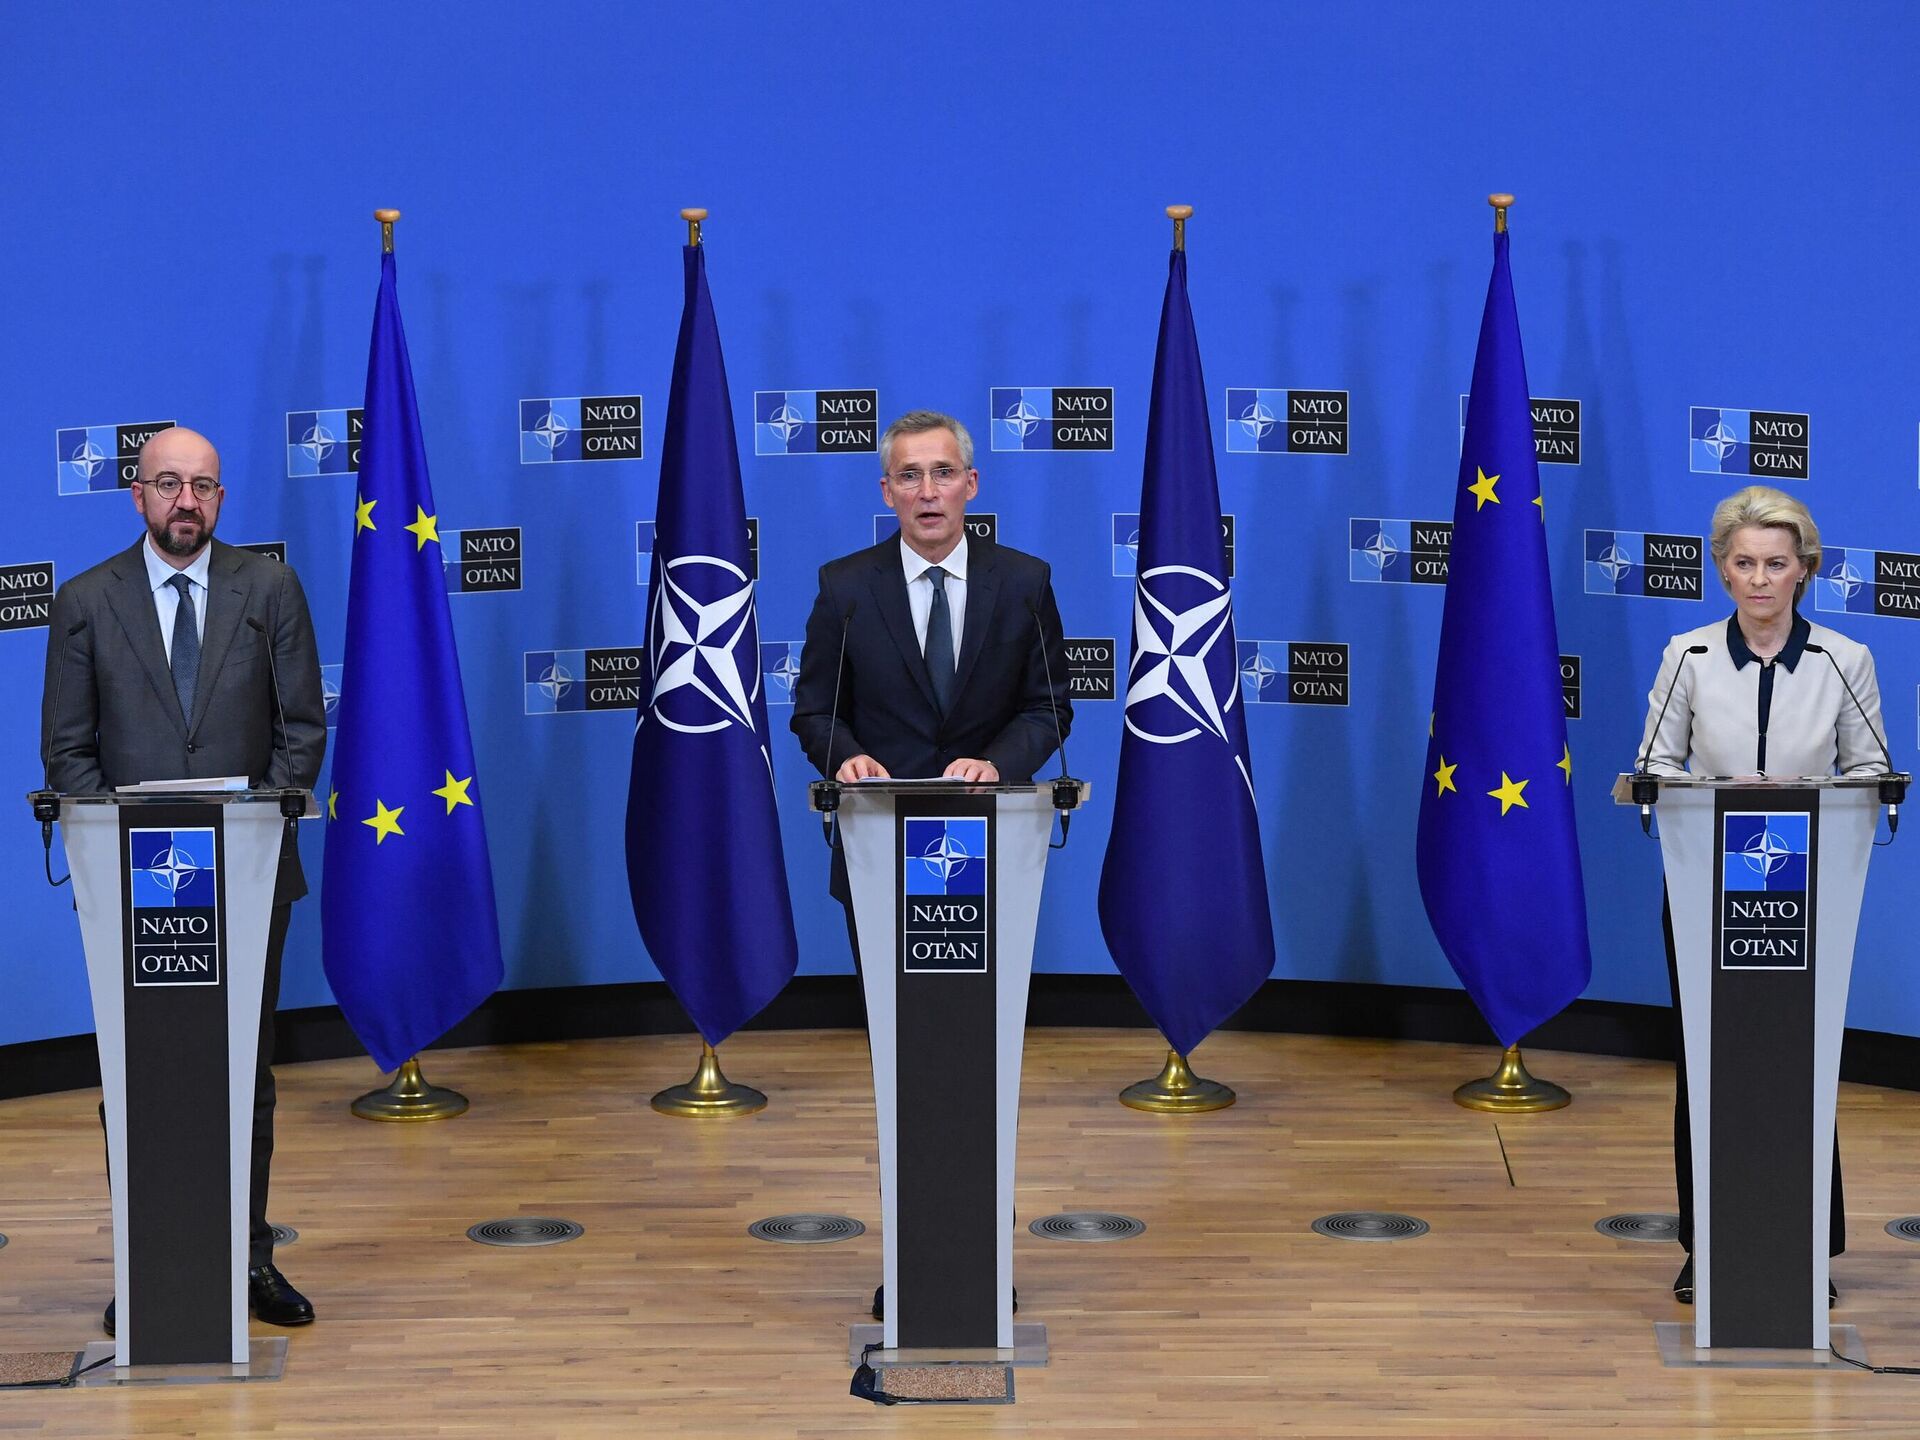 NATO and EU chiefs speaking at an event